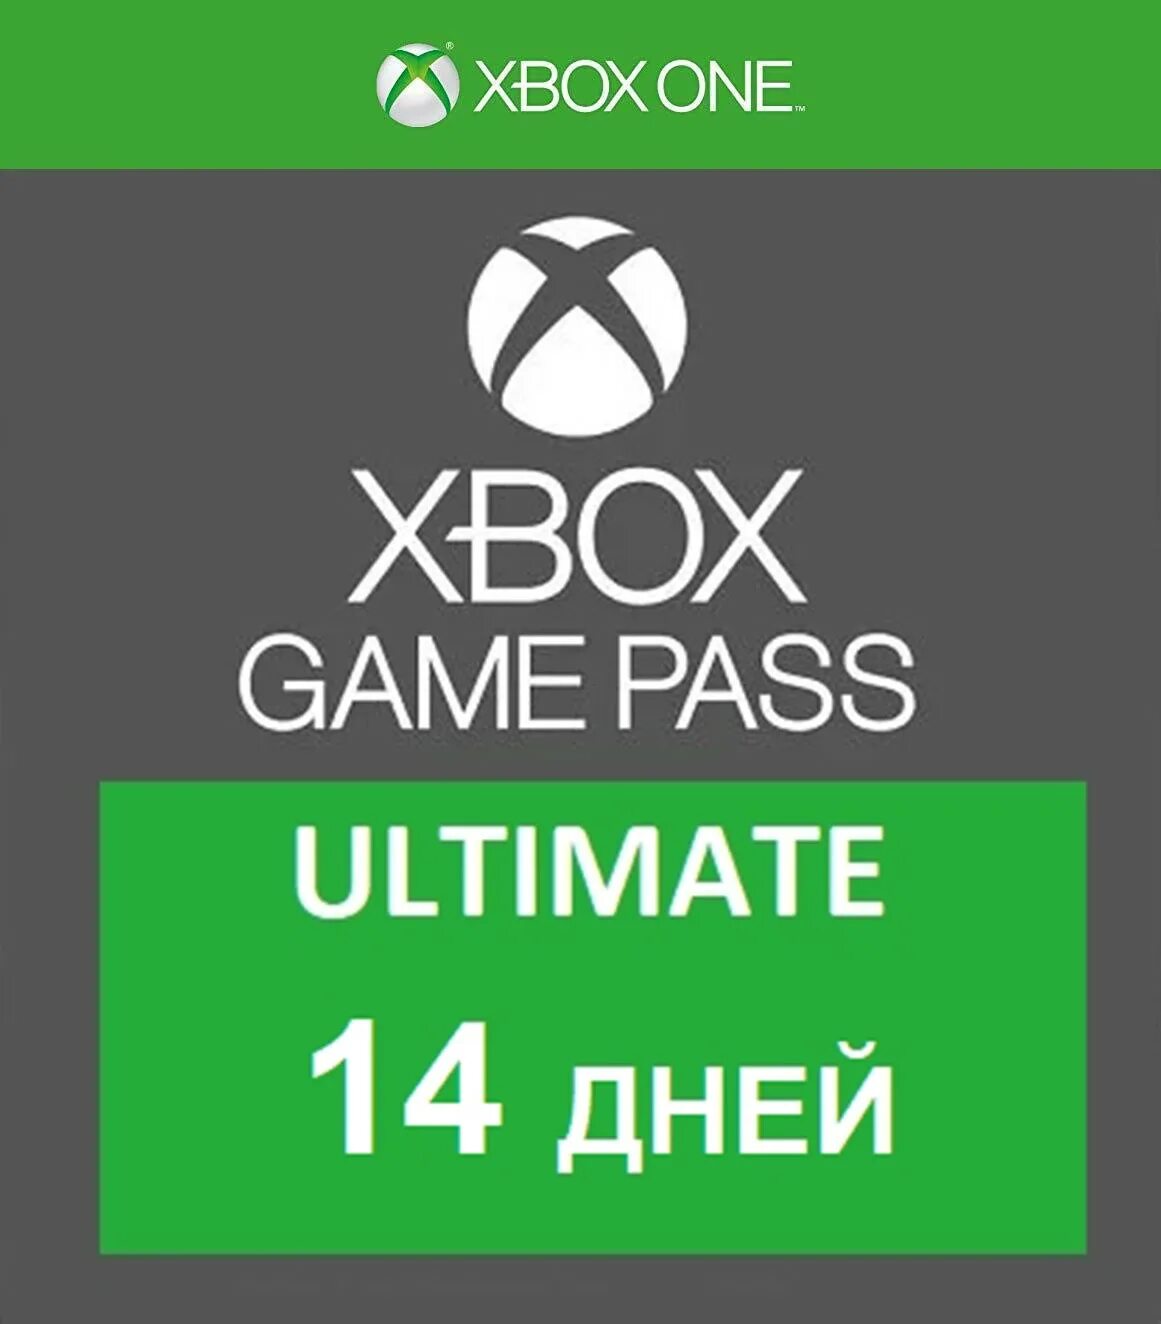 Xbox Ultimate Pass. Game Pass Ultimate. Подписка Xbox game Pass Ultimate. Xbox game Pass Ultimate buy. Купить подписку xbox месяц ultimate